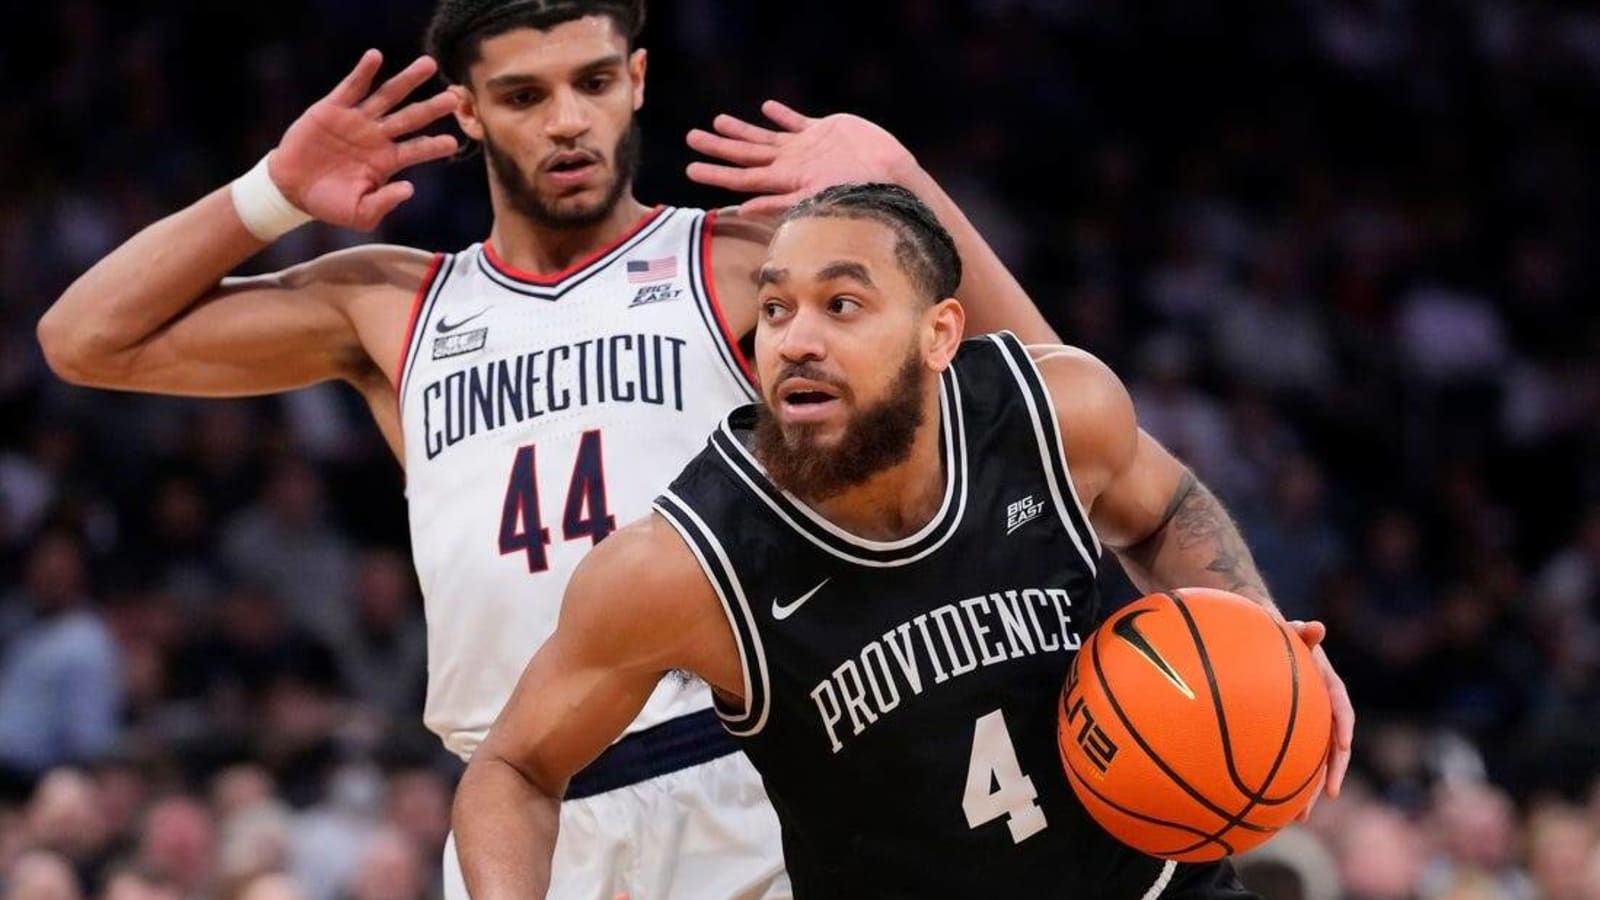 Reports: Providence G Jared Bynum enters transfer portal